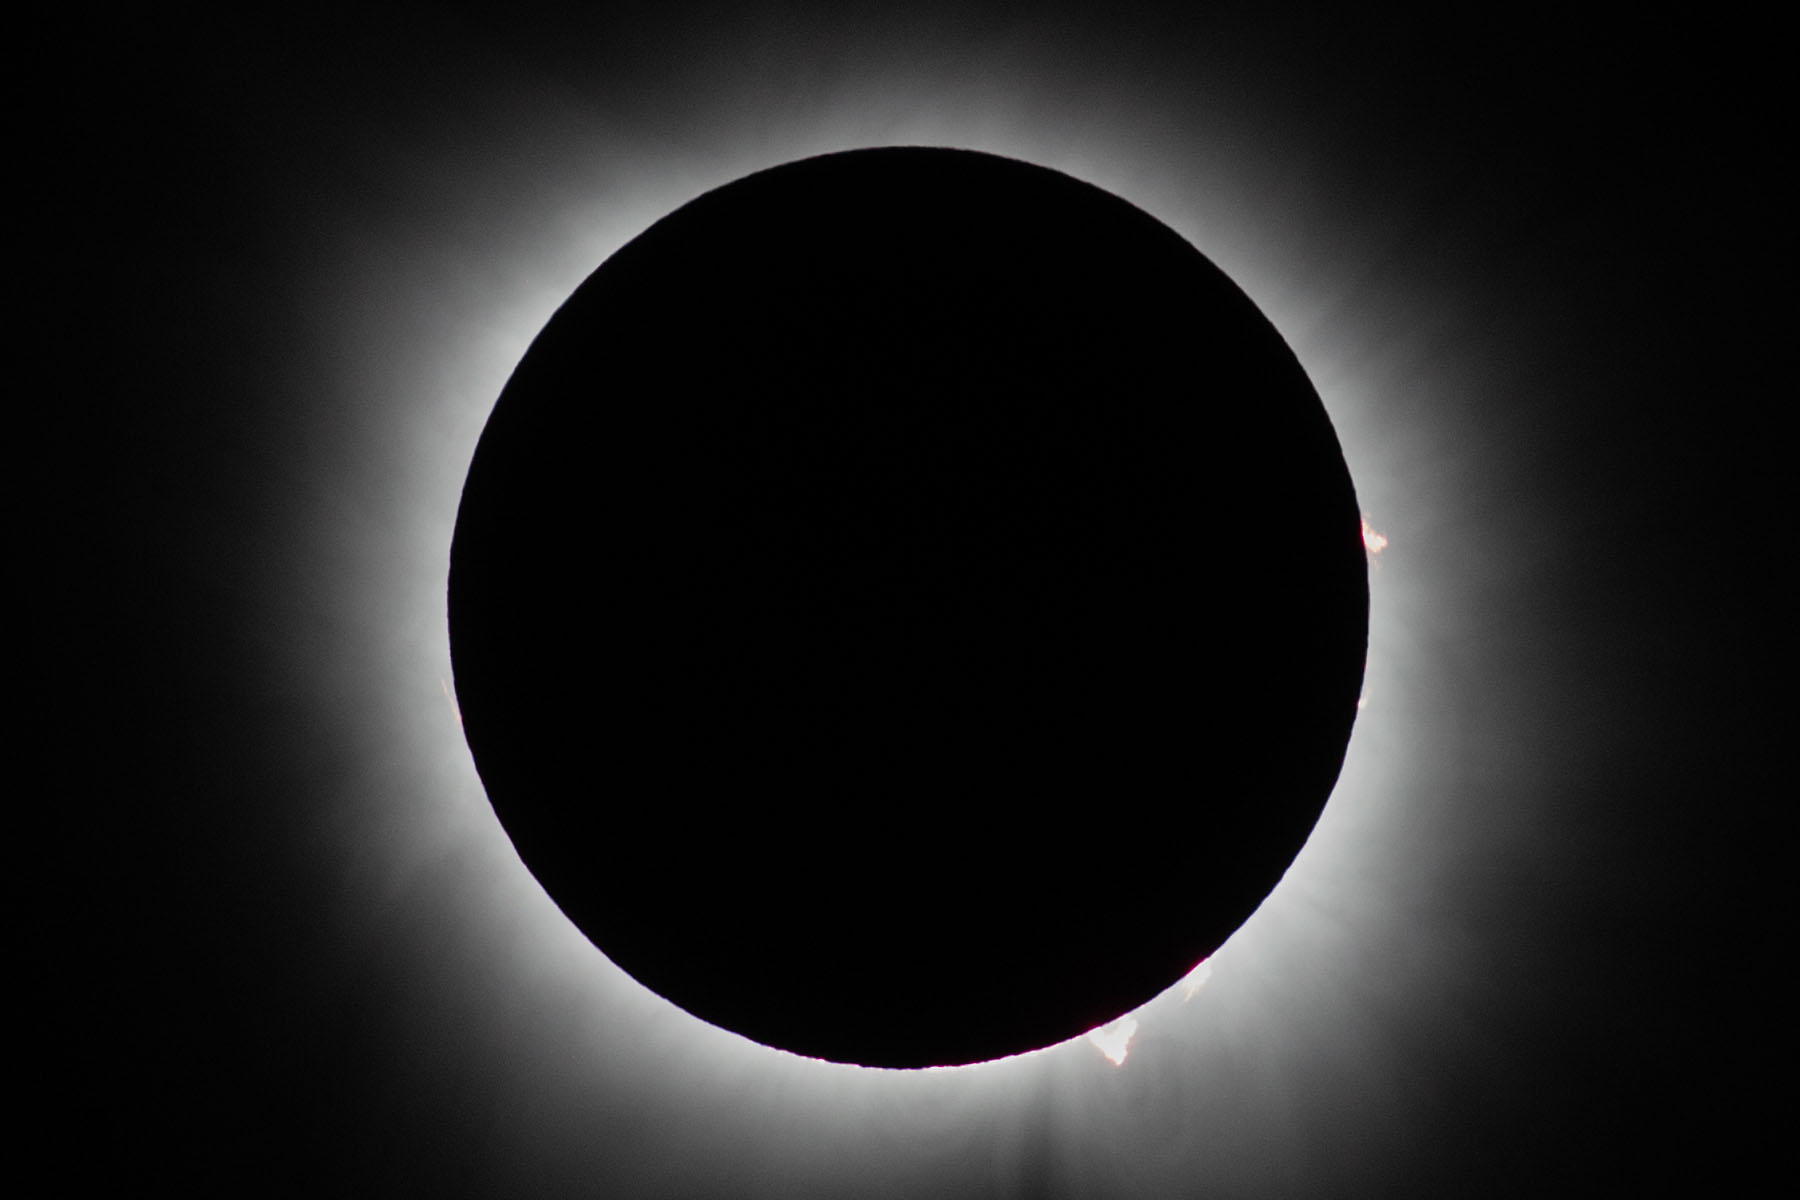 Reprocess of previous image, highlights adjusted to show prominences toward the end of totality.  Click for next photo.